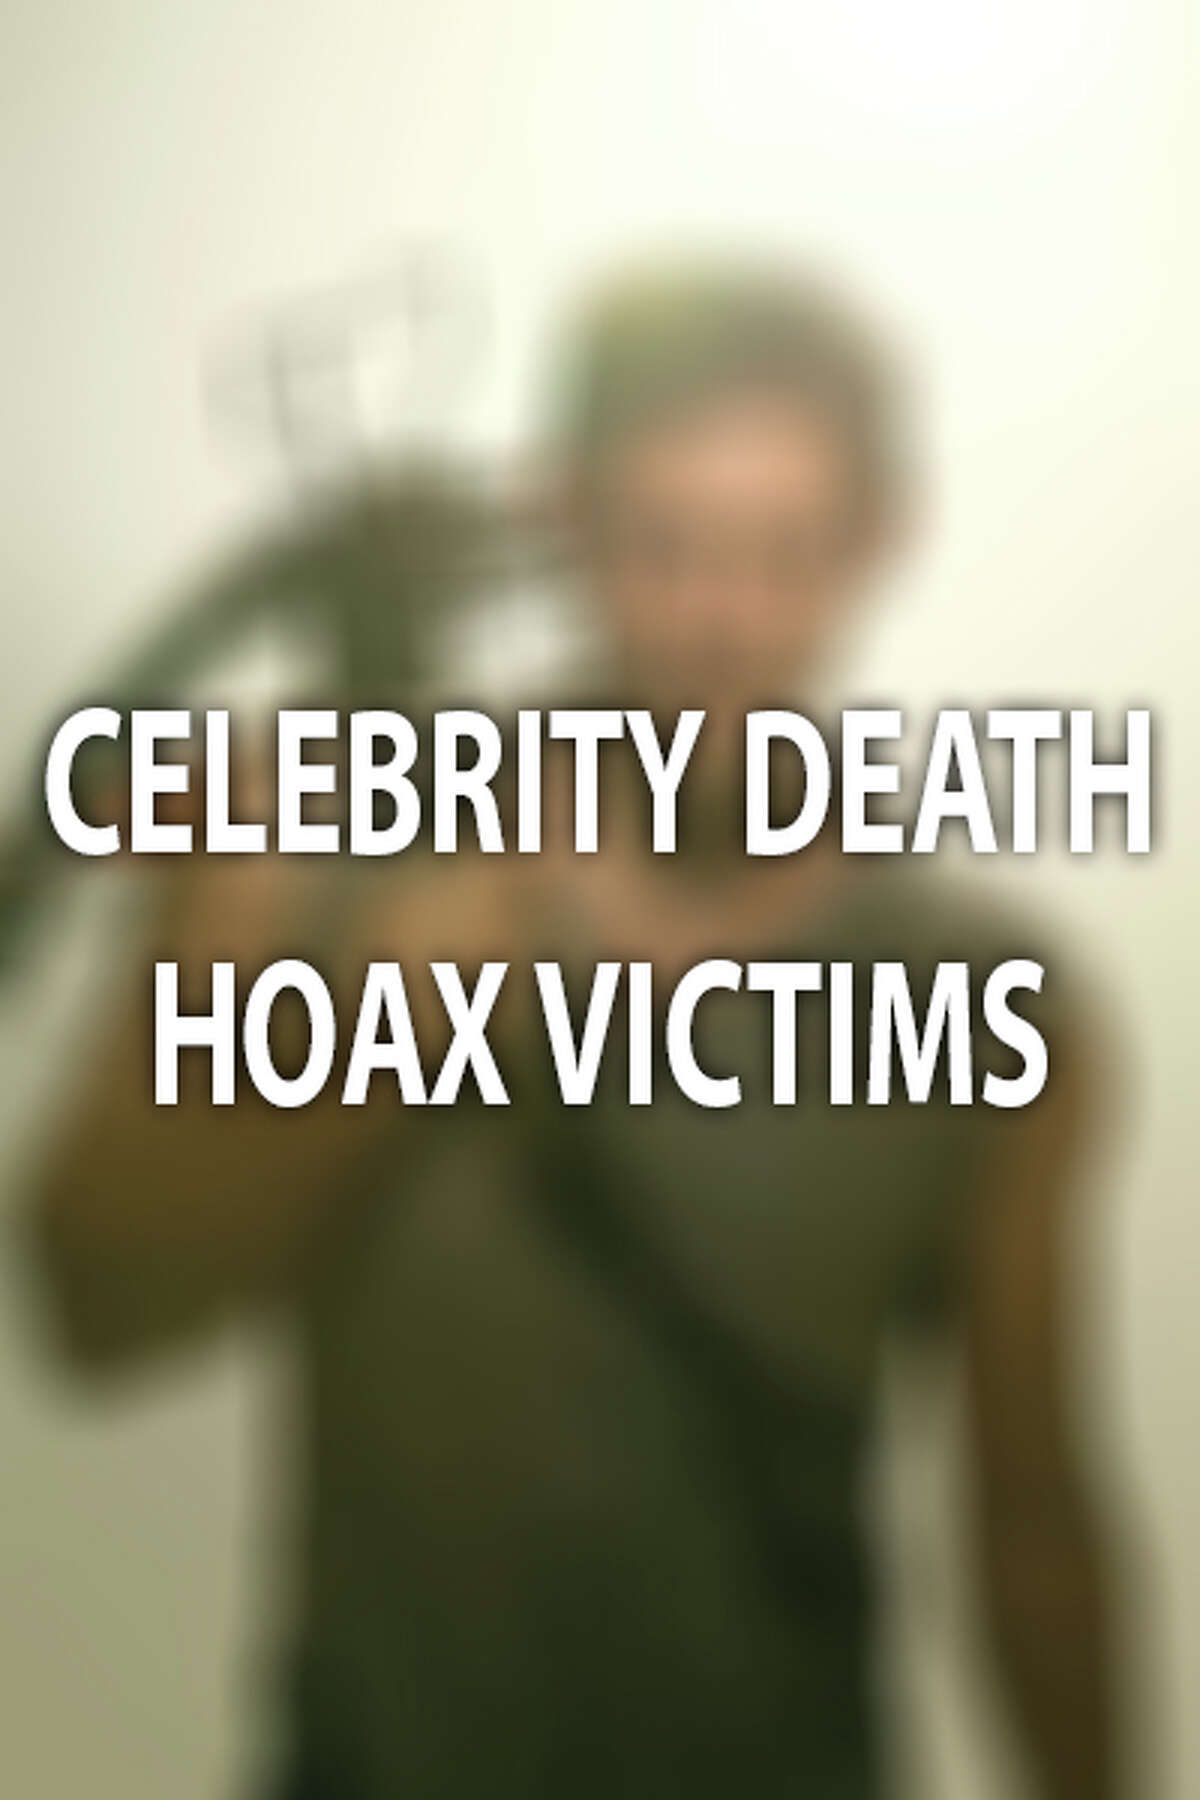 Fake news: Celebrities who were reported dead, but aren't